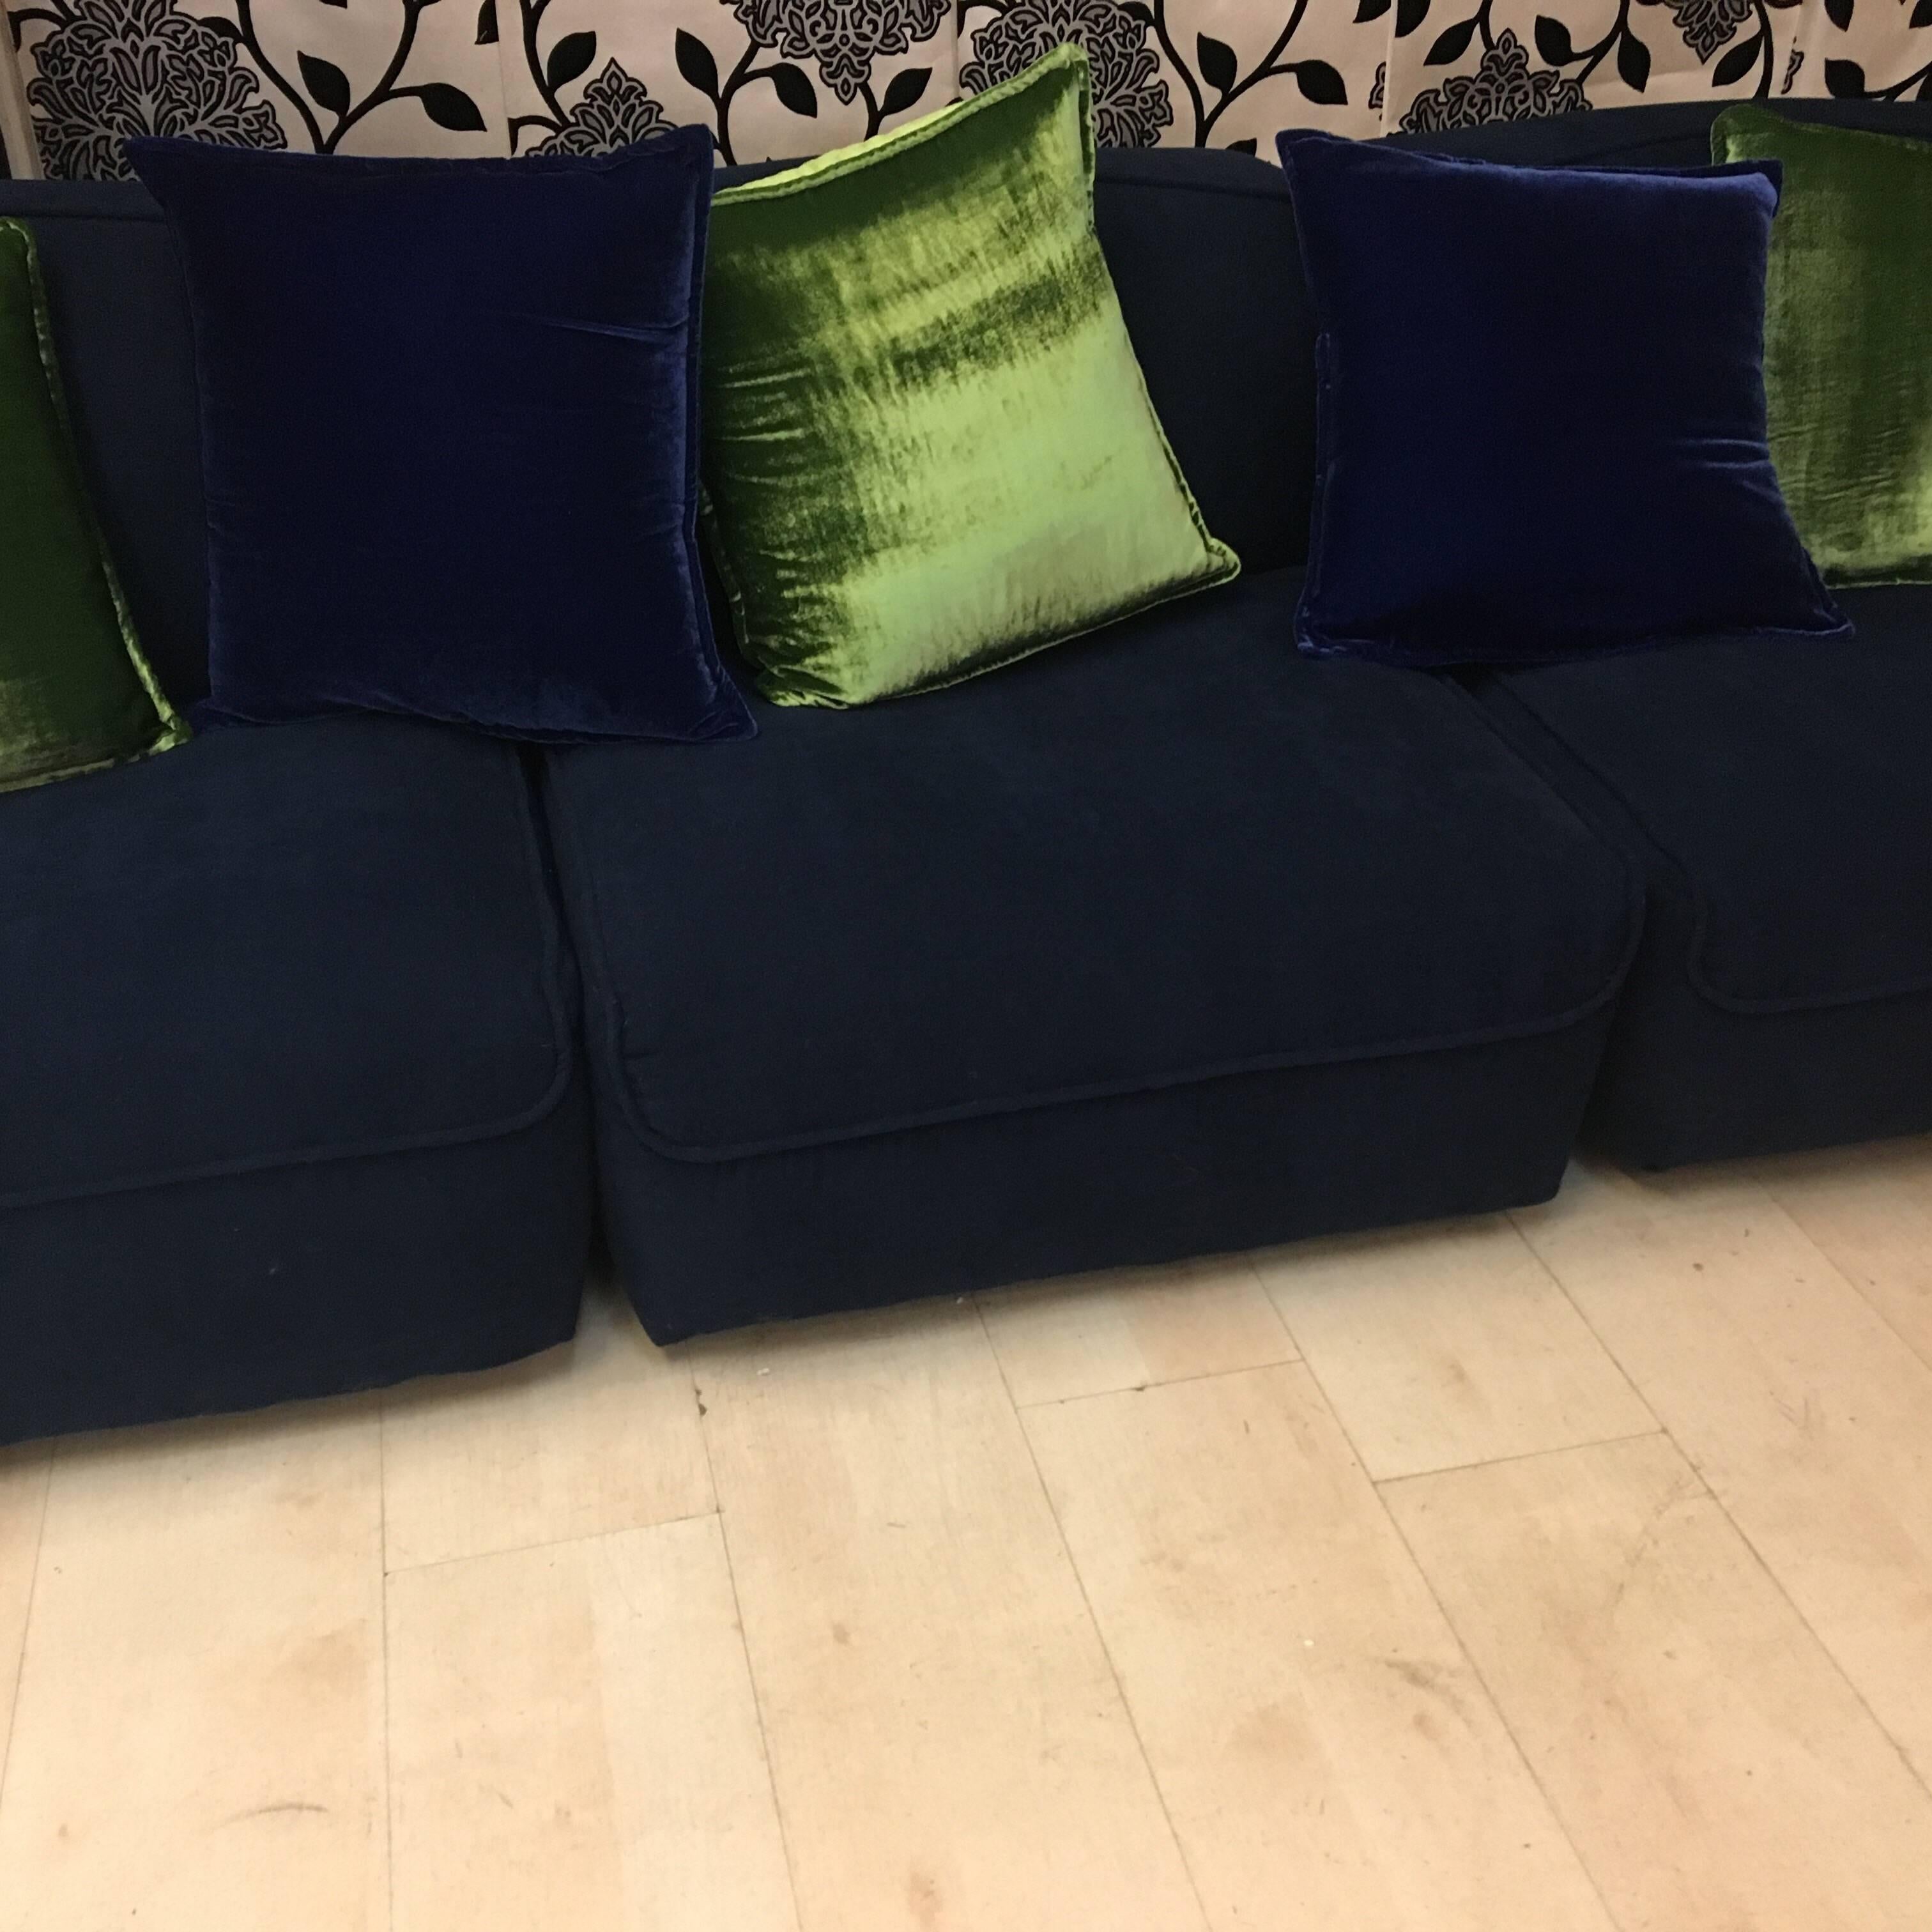 Blue velvet sectional Italian sofa newly upholstered, three chair pieces with acid green and blue velvet pillows.